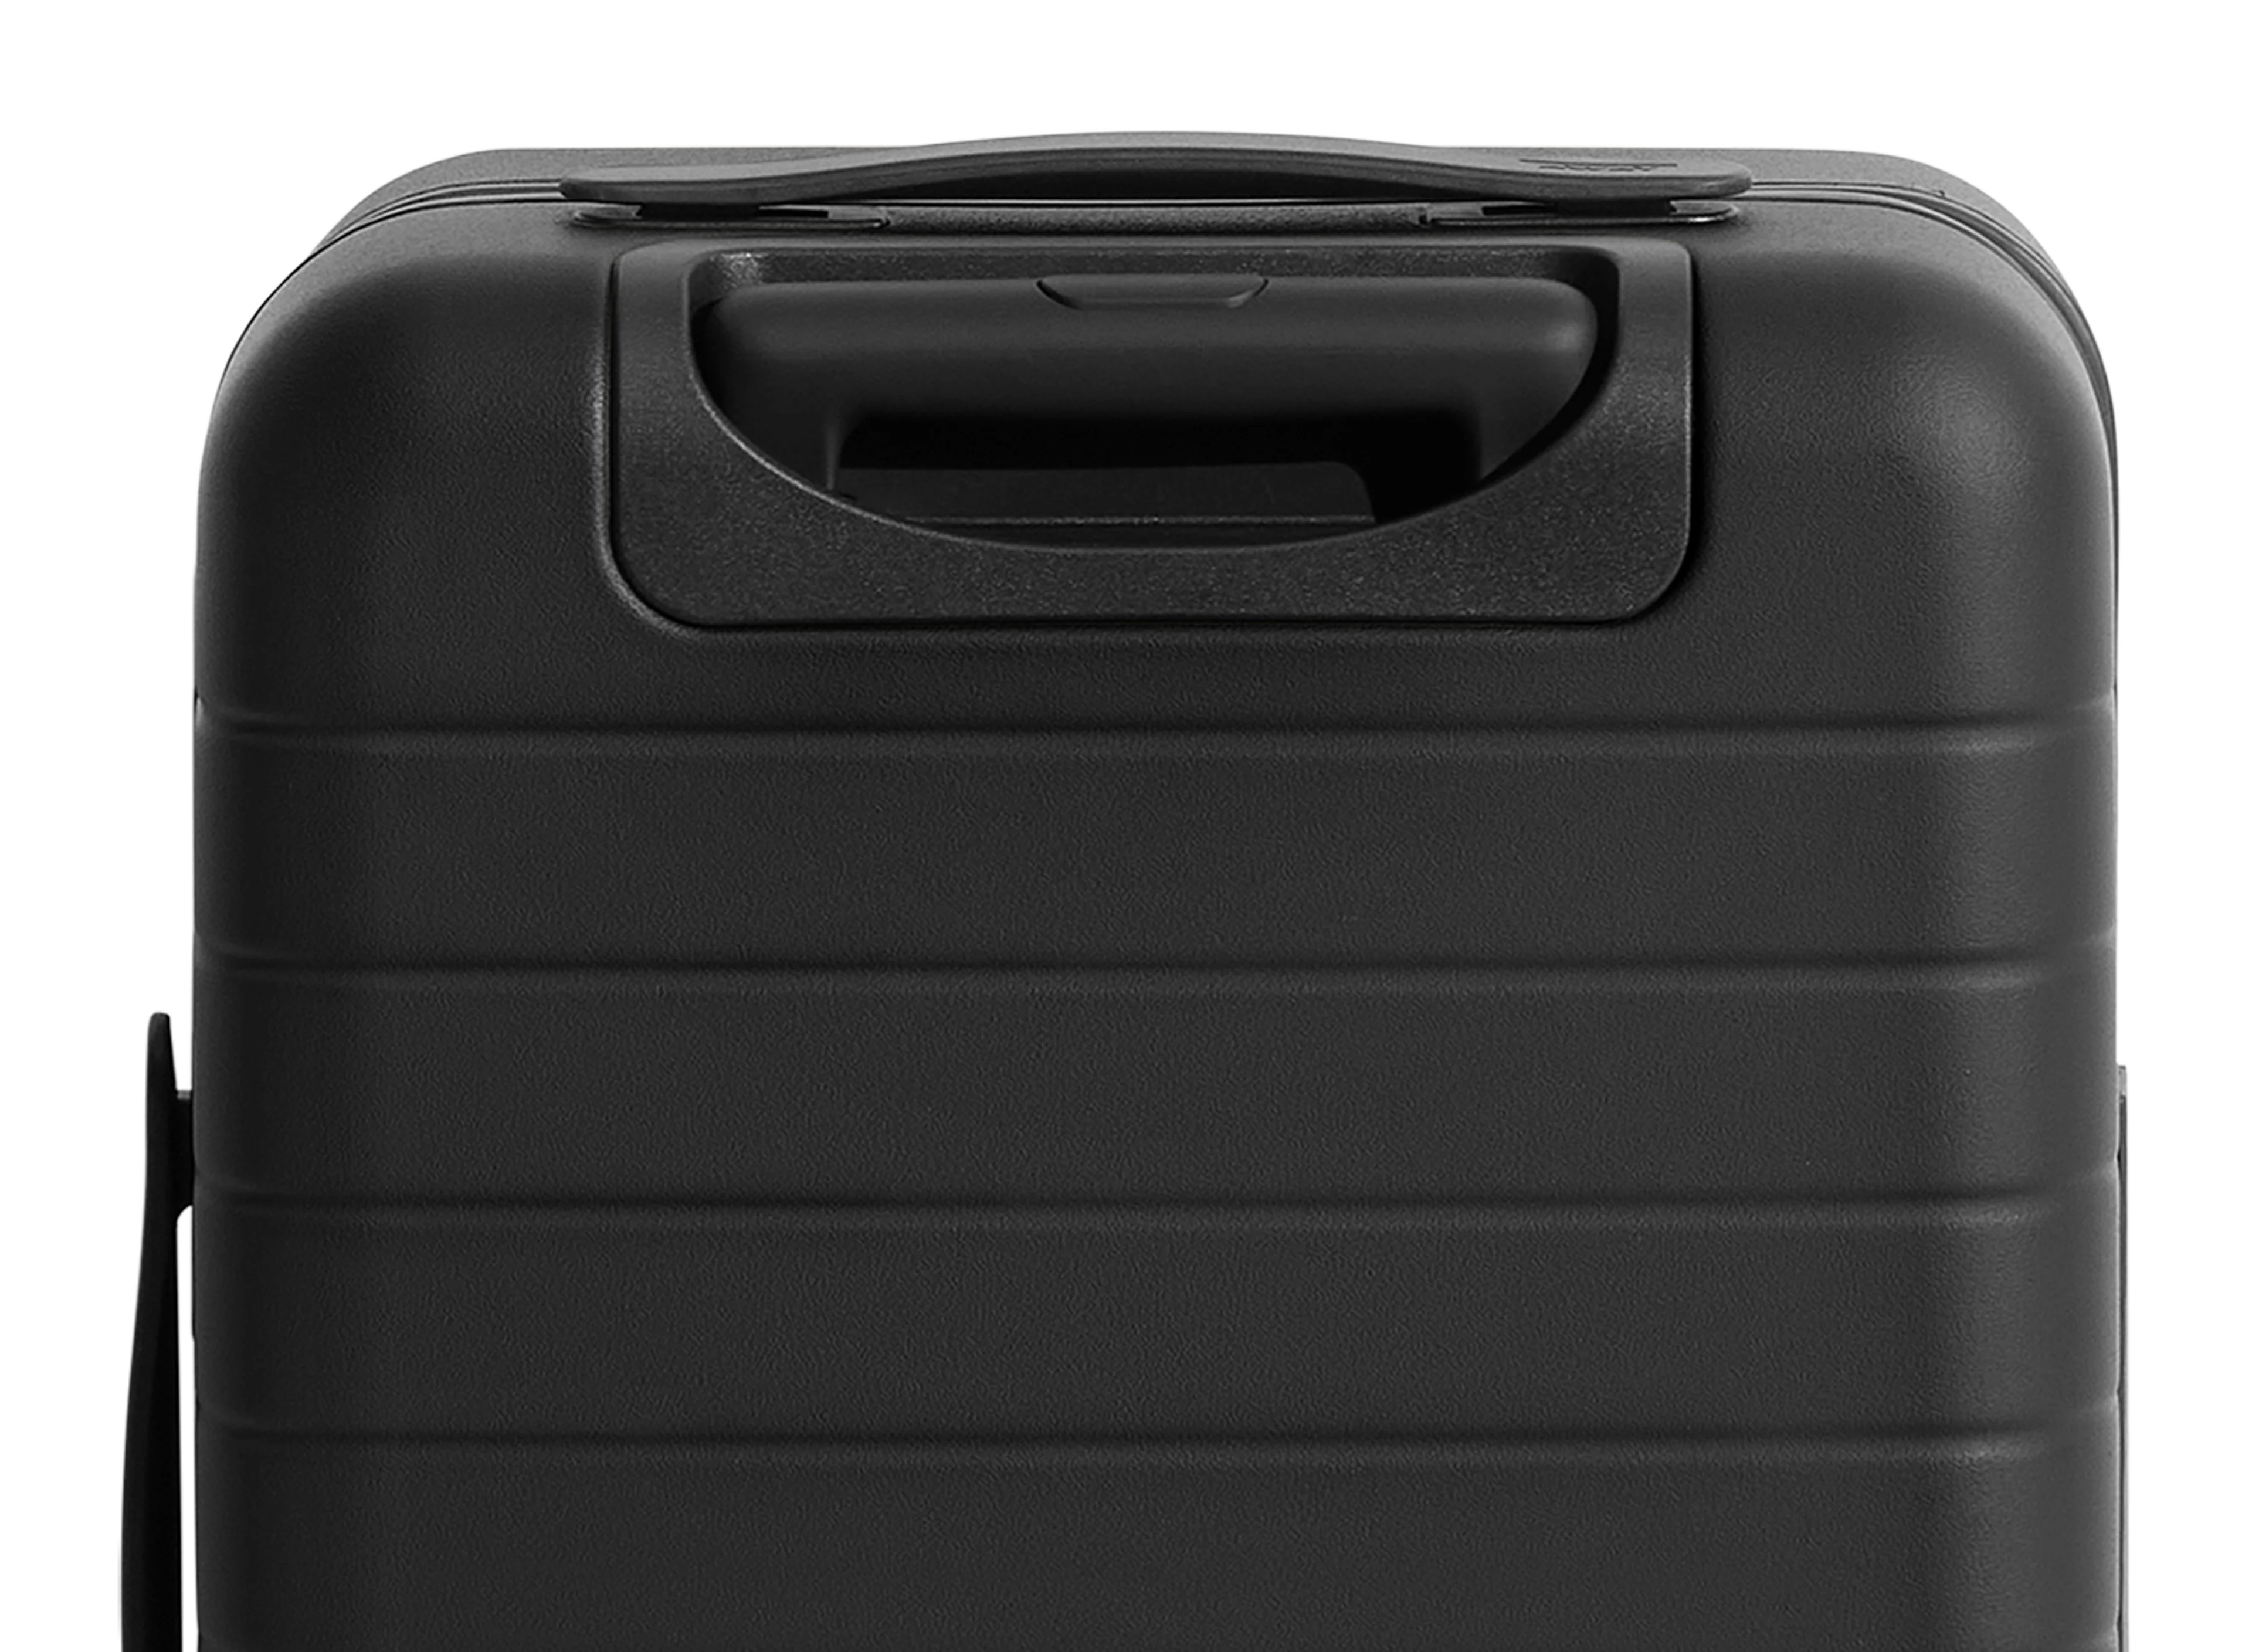 The Carry-On in Jet Black